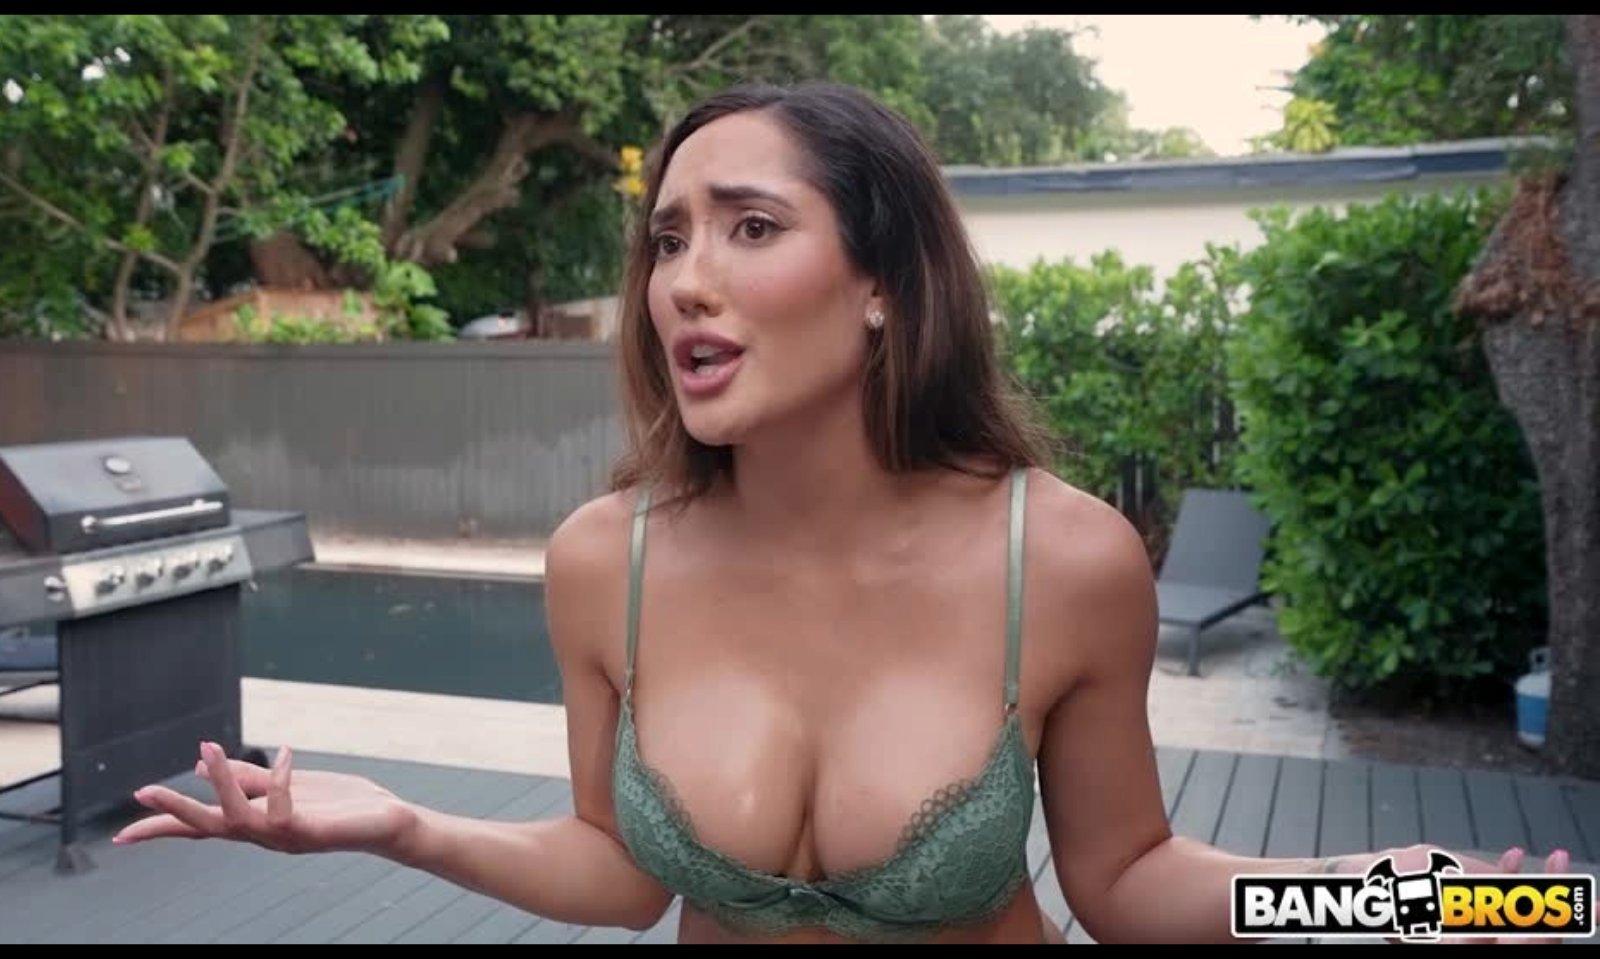 AVN Media Network on X: Chloe Amour Drops New Strap-On Scene With Hayley  Davies and More t.coFoDxYTyRQp @RealChloeAmour  t.coCjWwJlR6hr  X